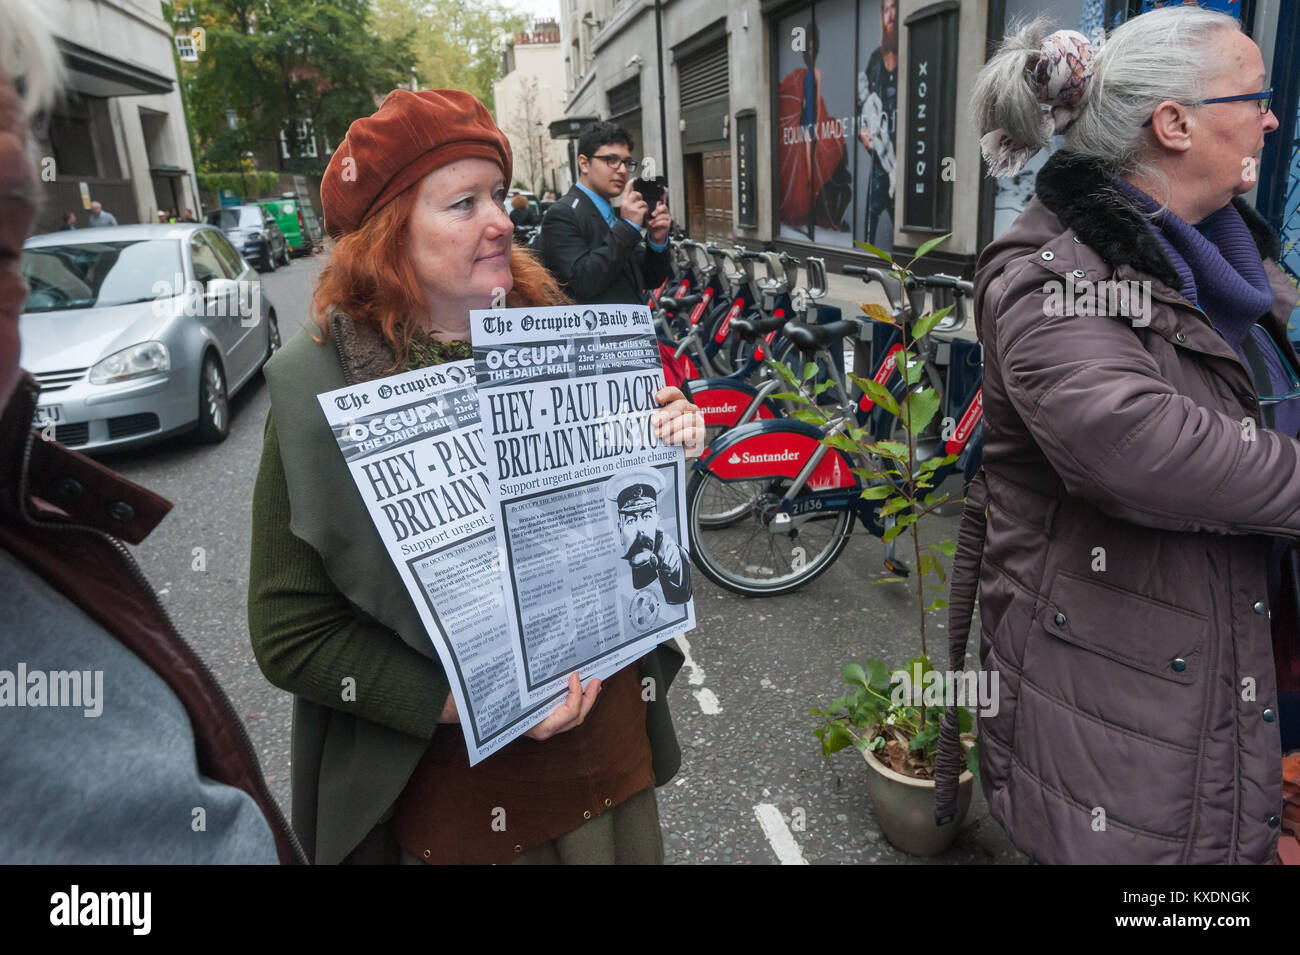 48 hour protest by Occupy aimed at getting the Daily Mail to end its support for fossil fuels and climate deniers and to support policies which mitigate climate change. Stock Photo